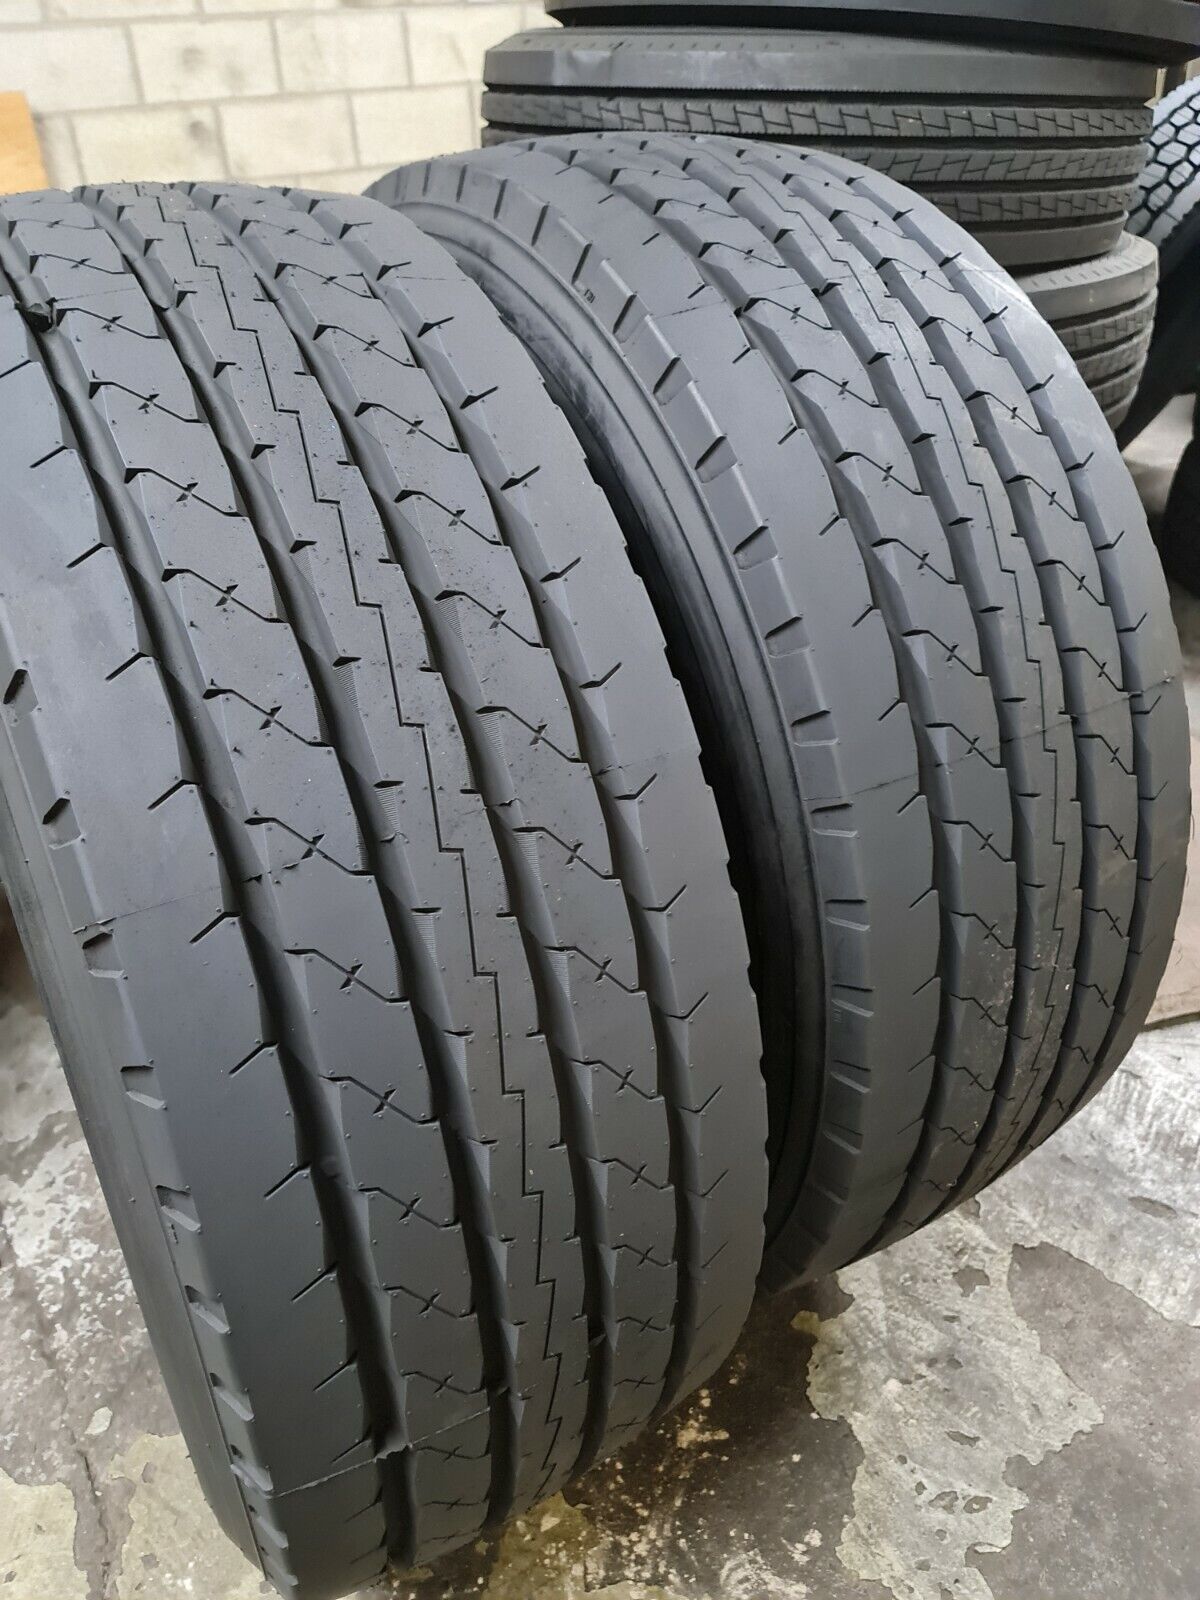 (2-Tires) 385/65R22.5 20 PLY ROAD CREW TRUCK RADIAL ALL POSITIONS